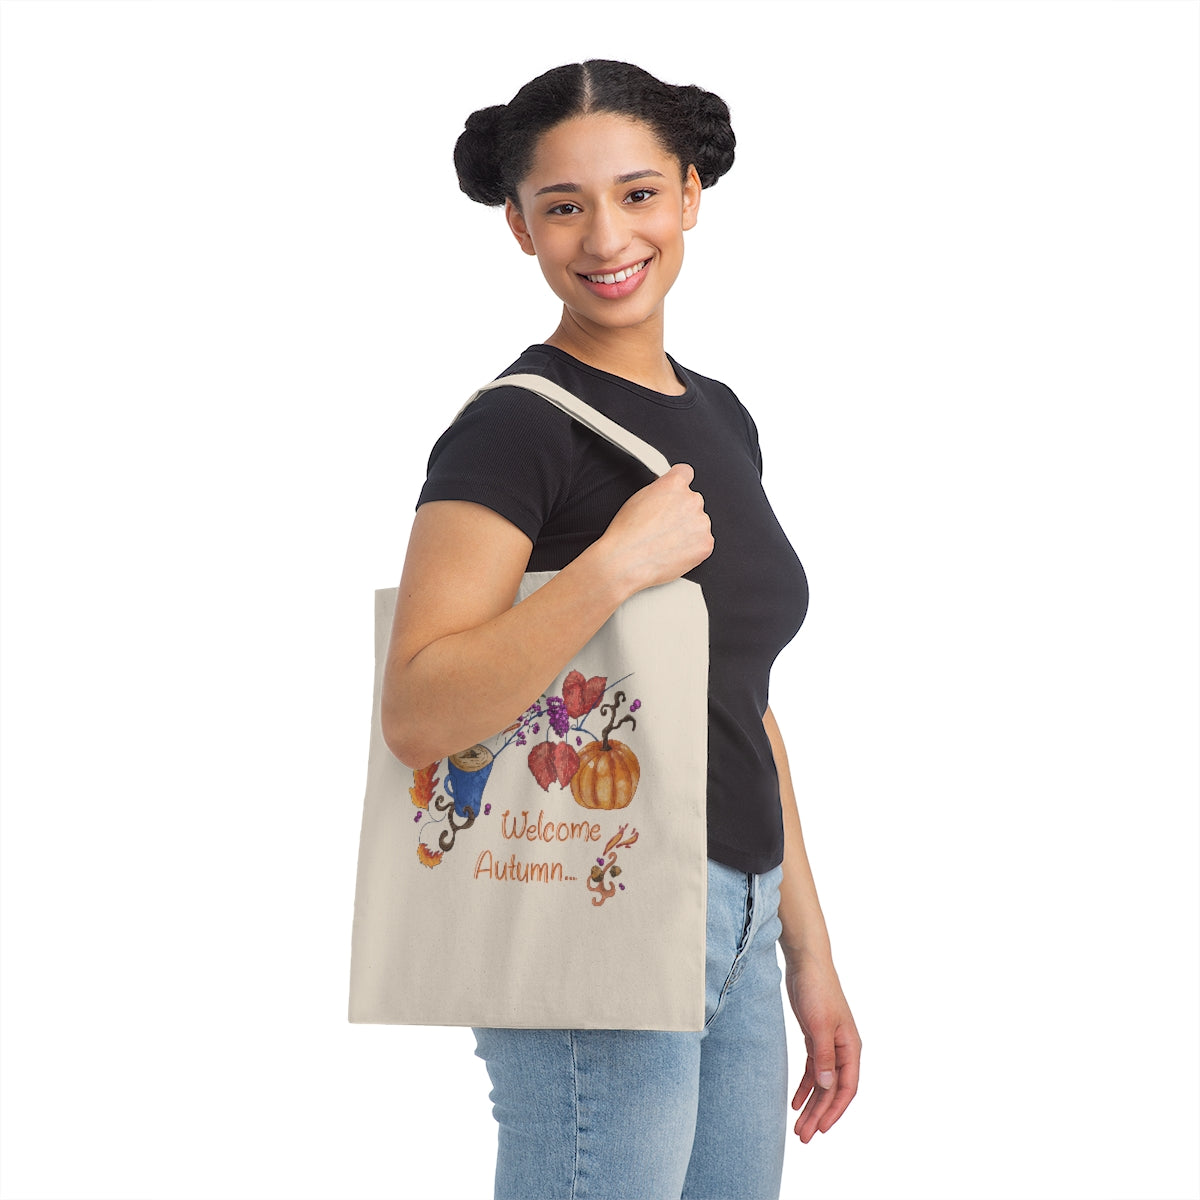 Welcome Autumn - natural canvas Tote bag